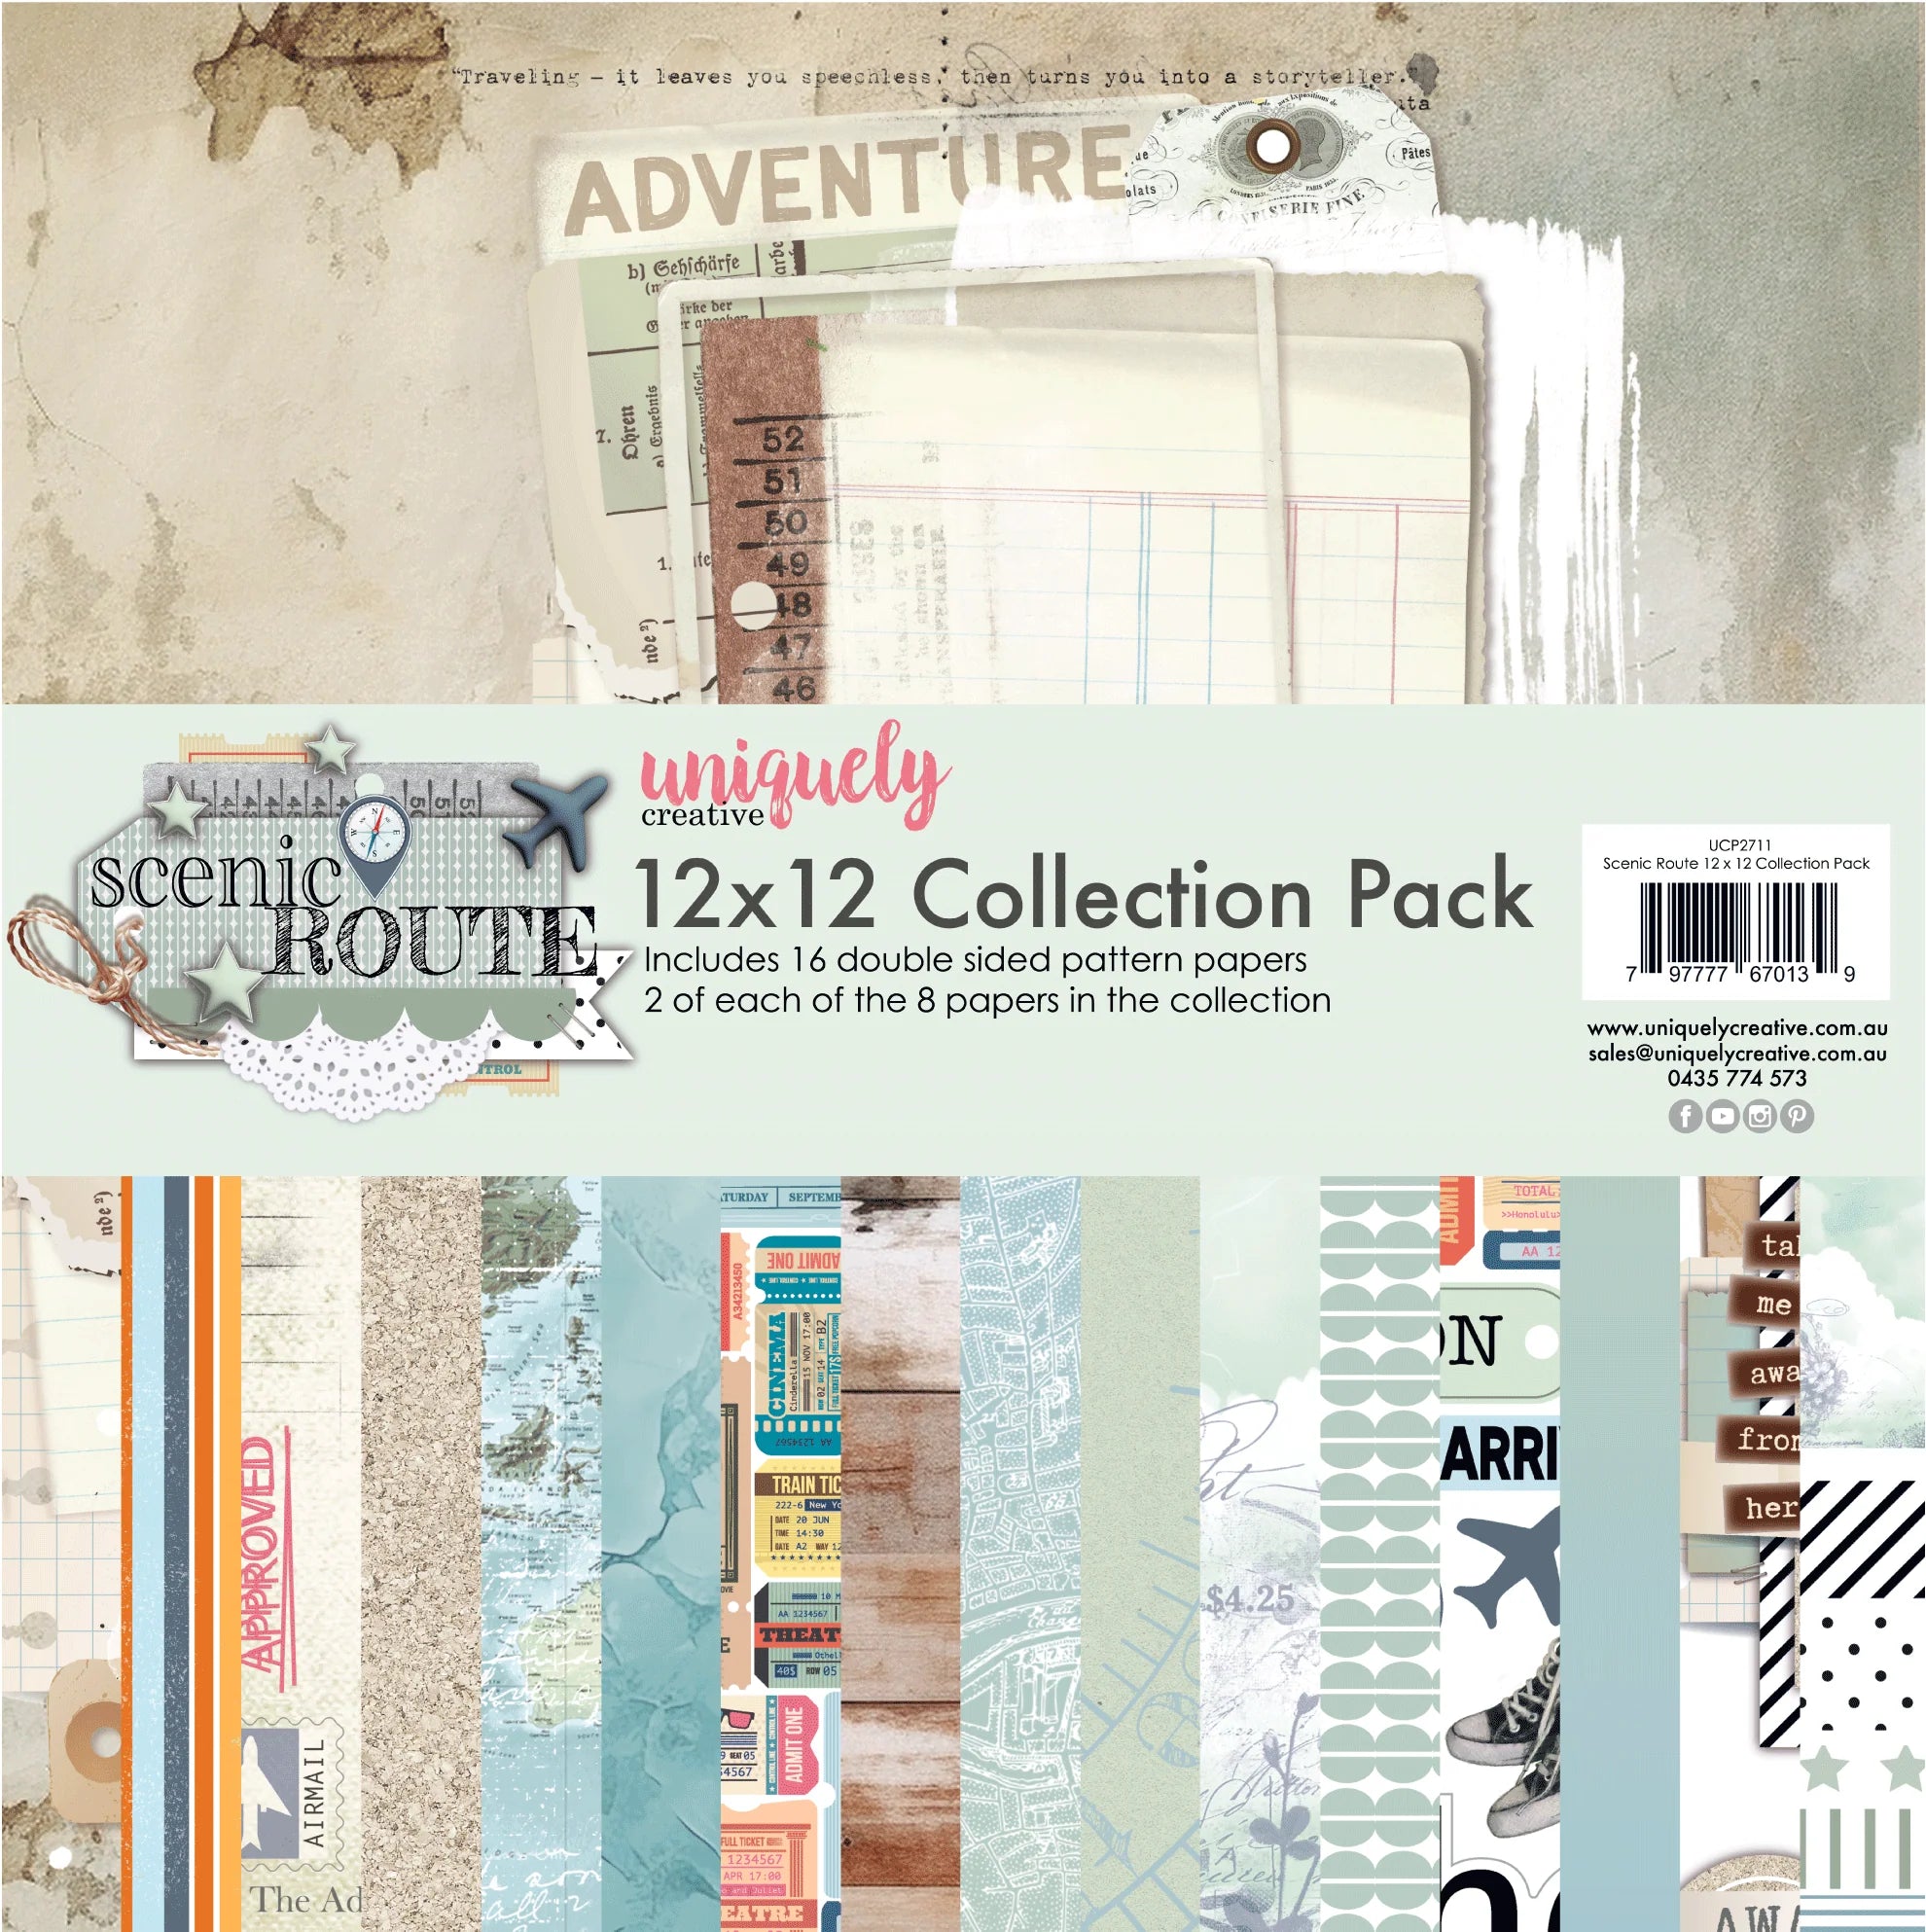 Uniquely Creative - 12x12 Collection Pack - Scenic Route